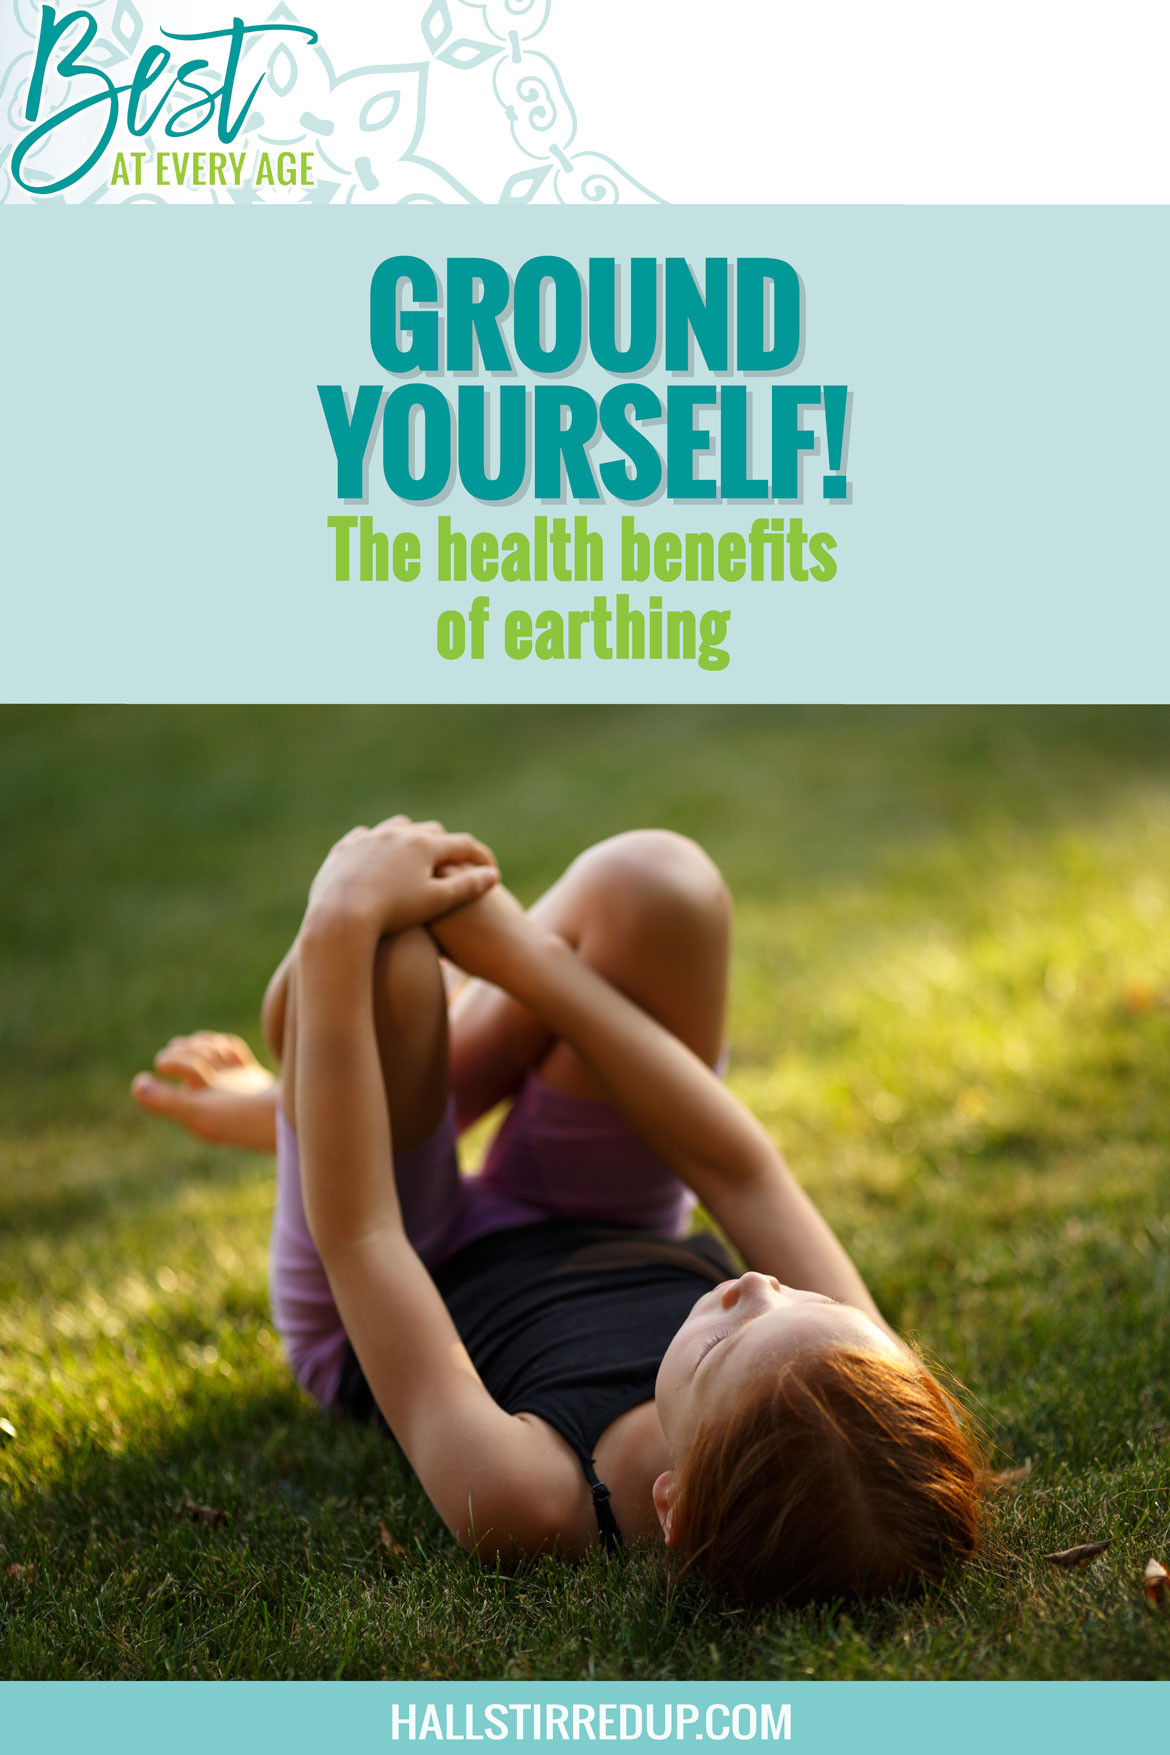 Ground yourself The health benefits of earthing